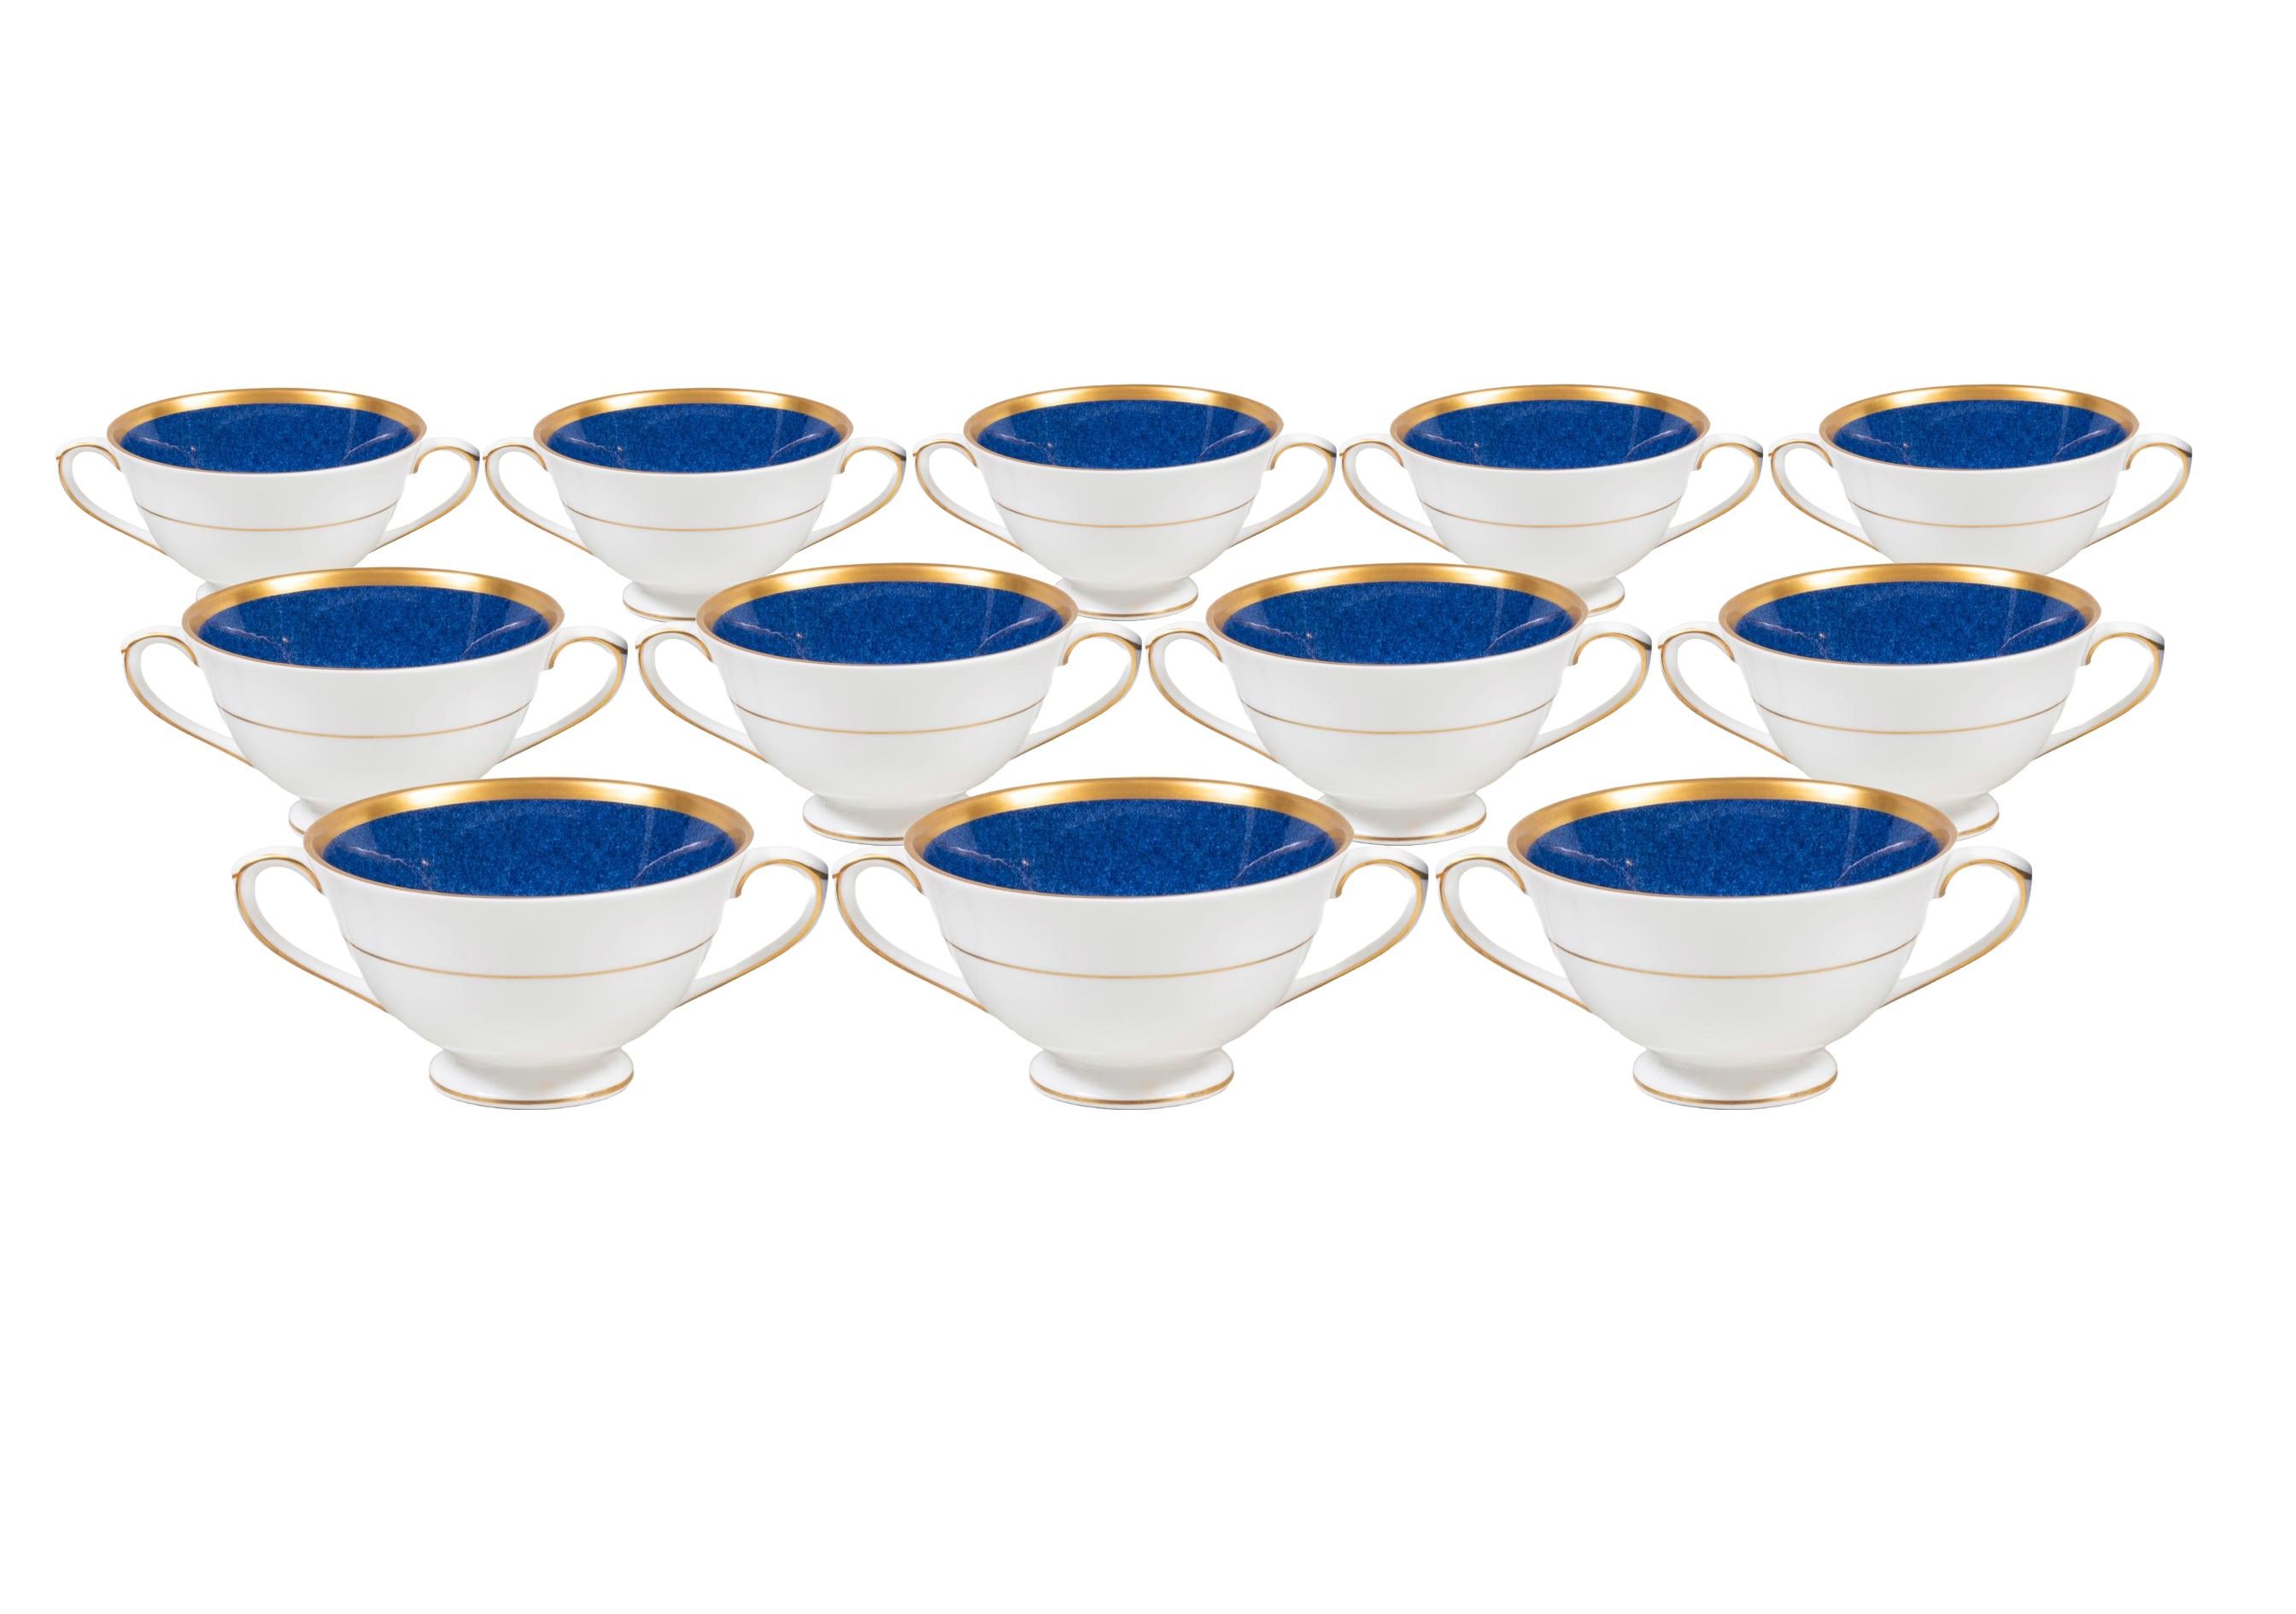 Gilt Complete English Porcelain Dinner Service For 12 People With Coffee/Tea Service For Sale